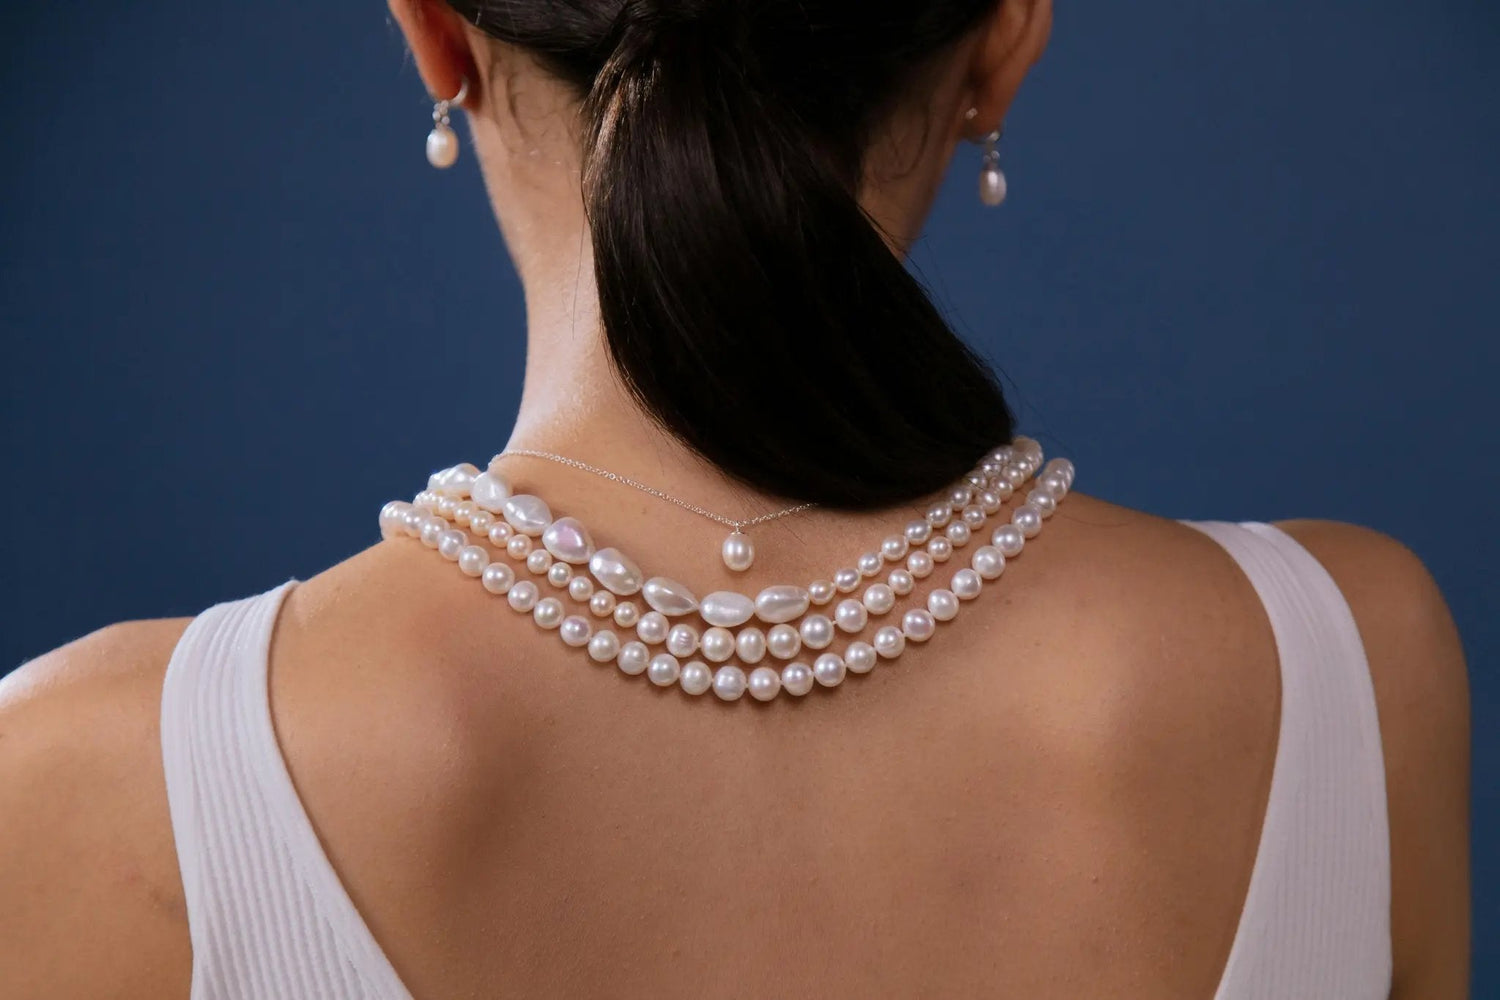 Woman's back displaying multiple white pearl necklaces and pearl pendant.